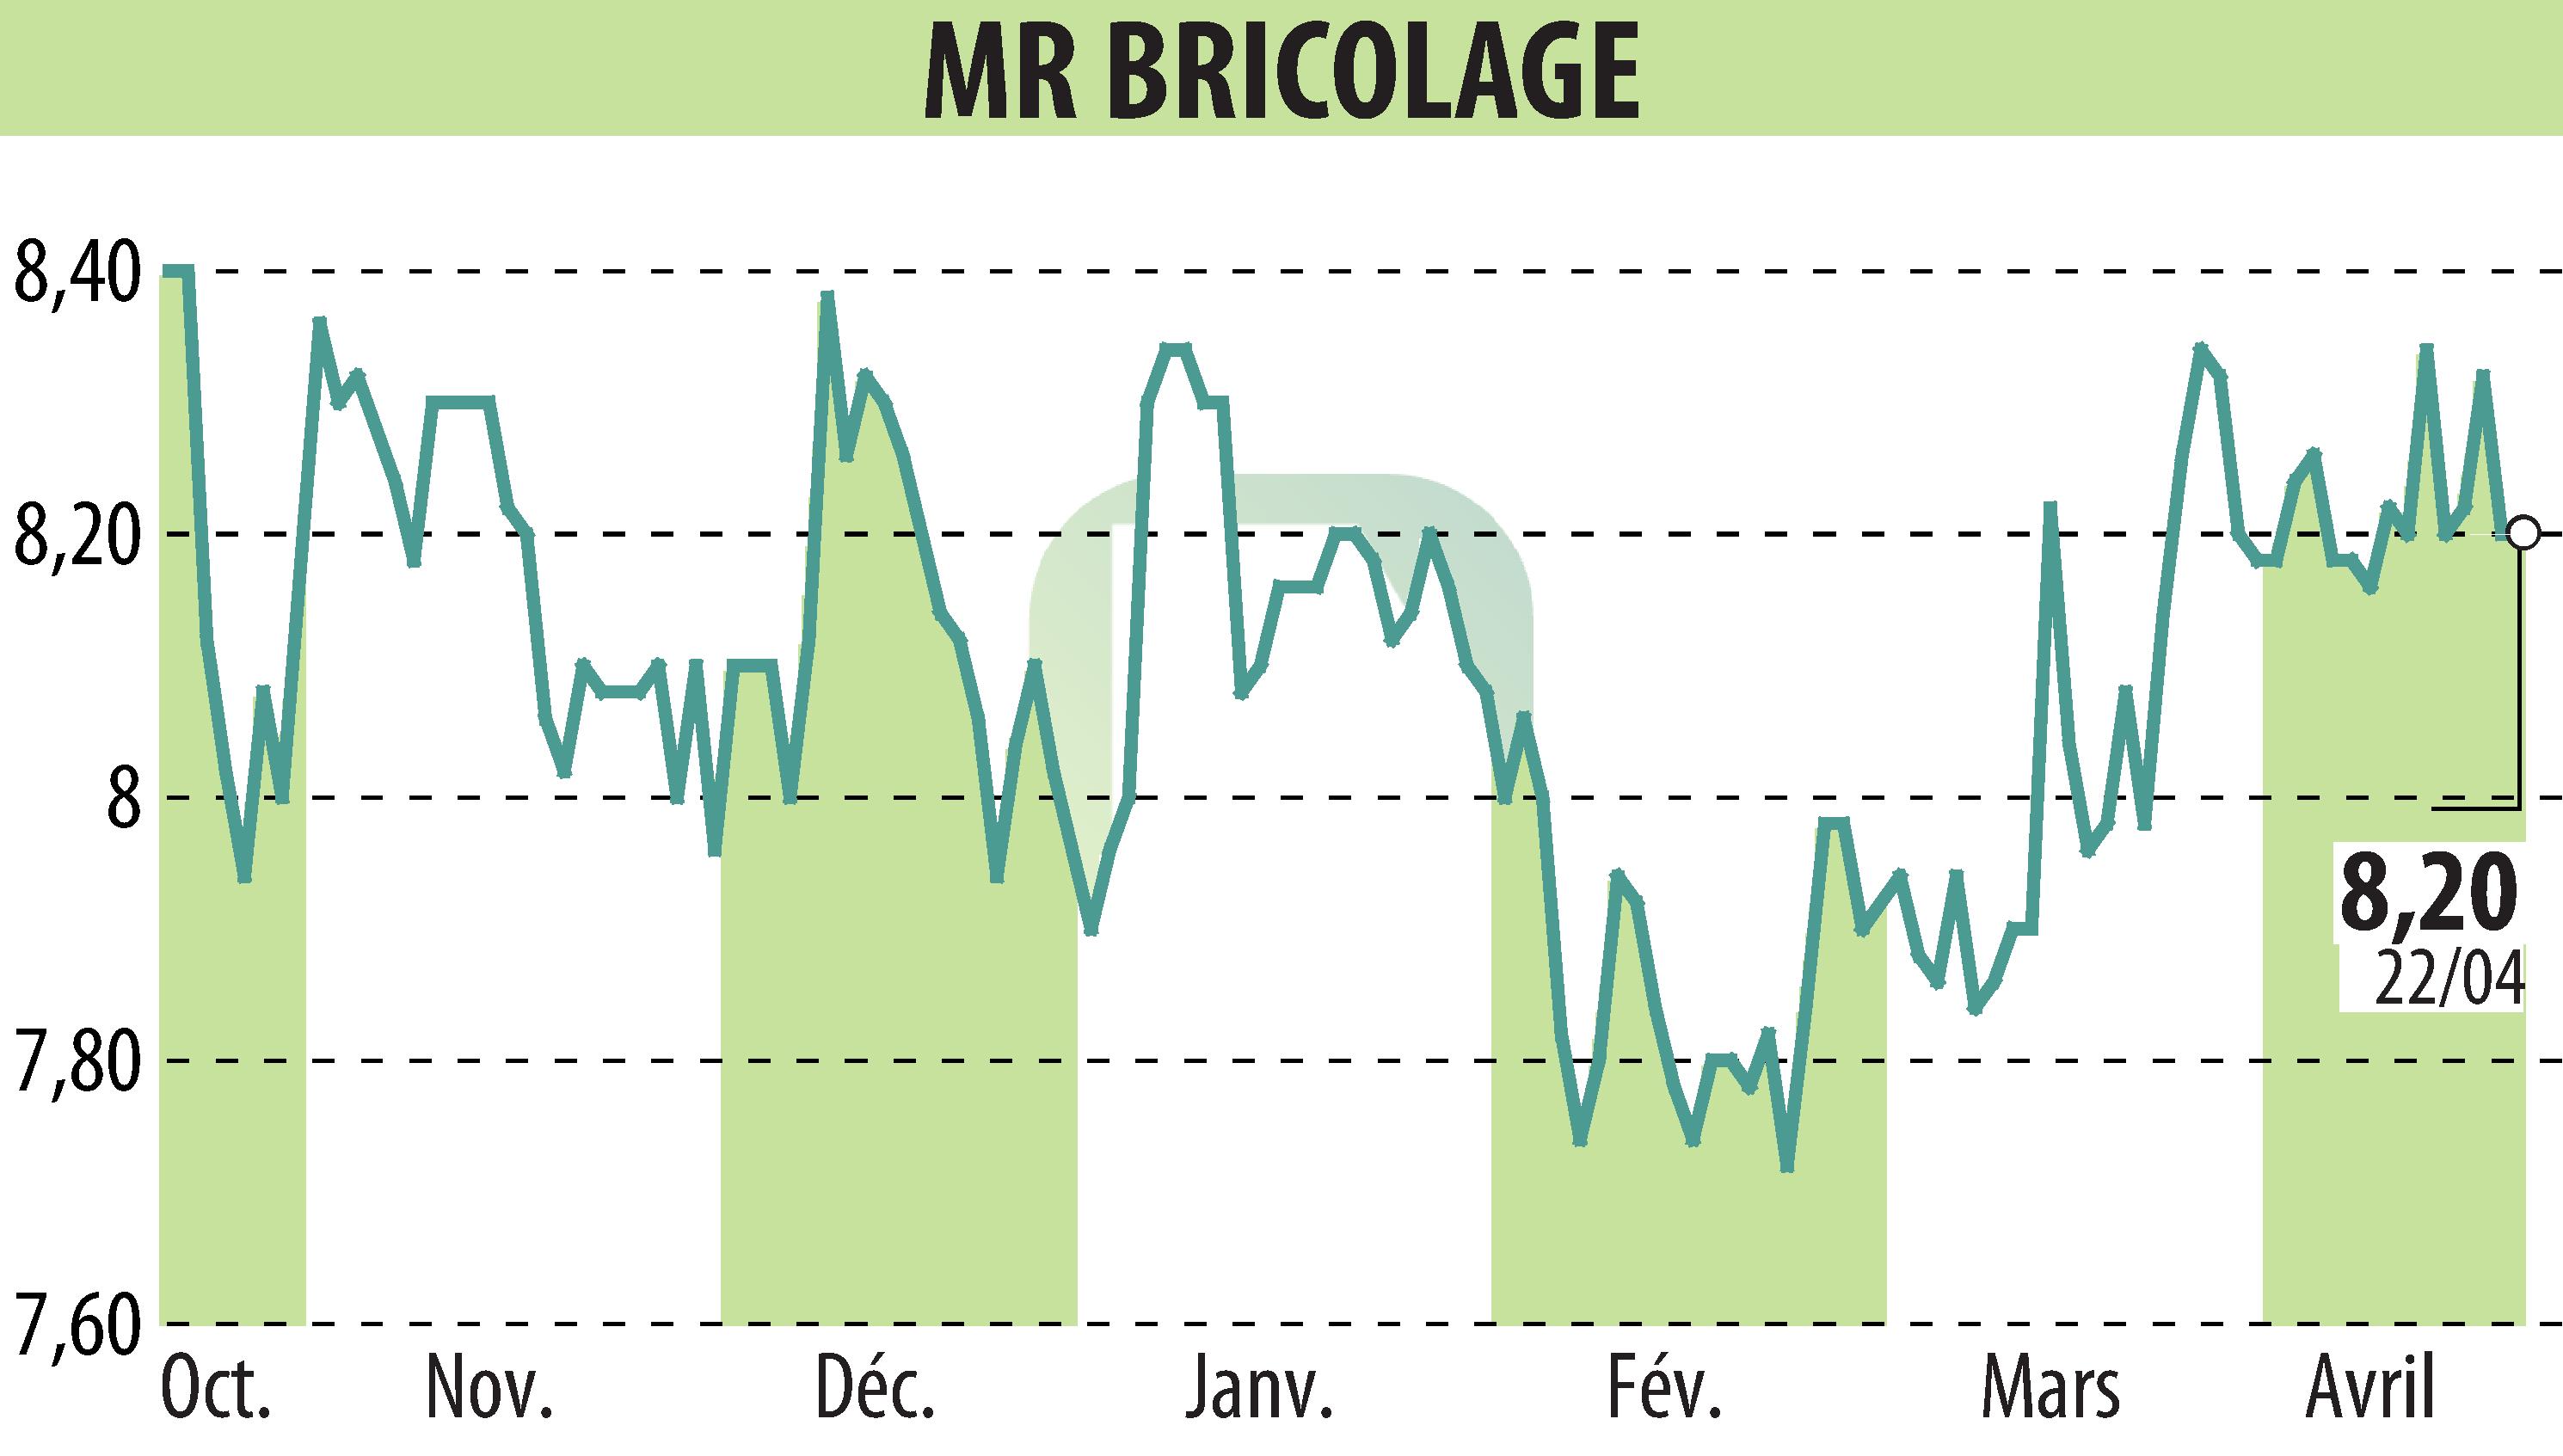 Stock price chart of MR BRICOLAGE (EPA:ALMRB) showing fluctuations.